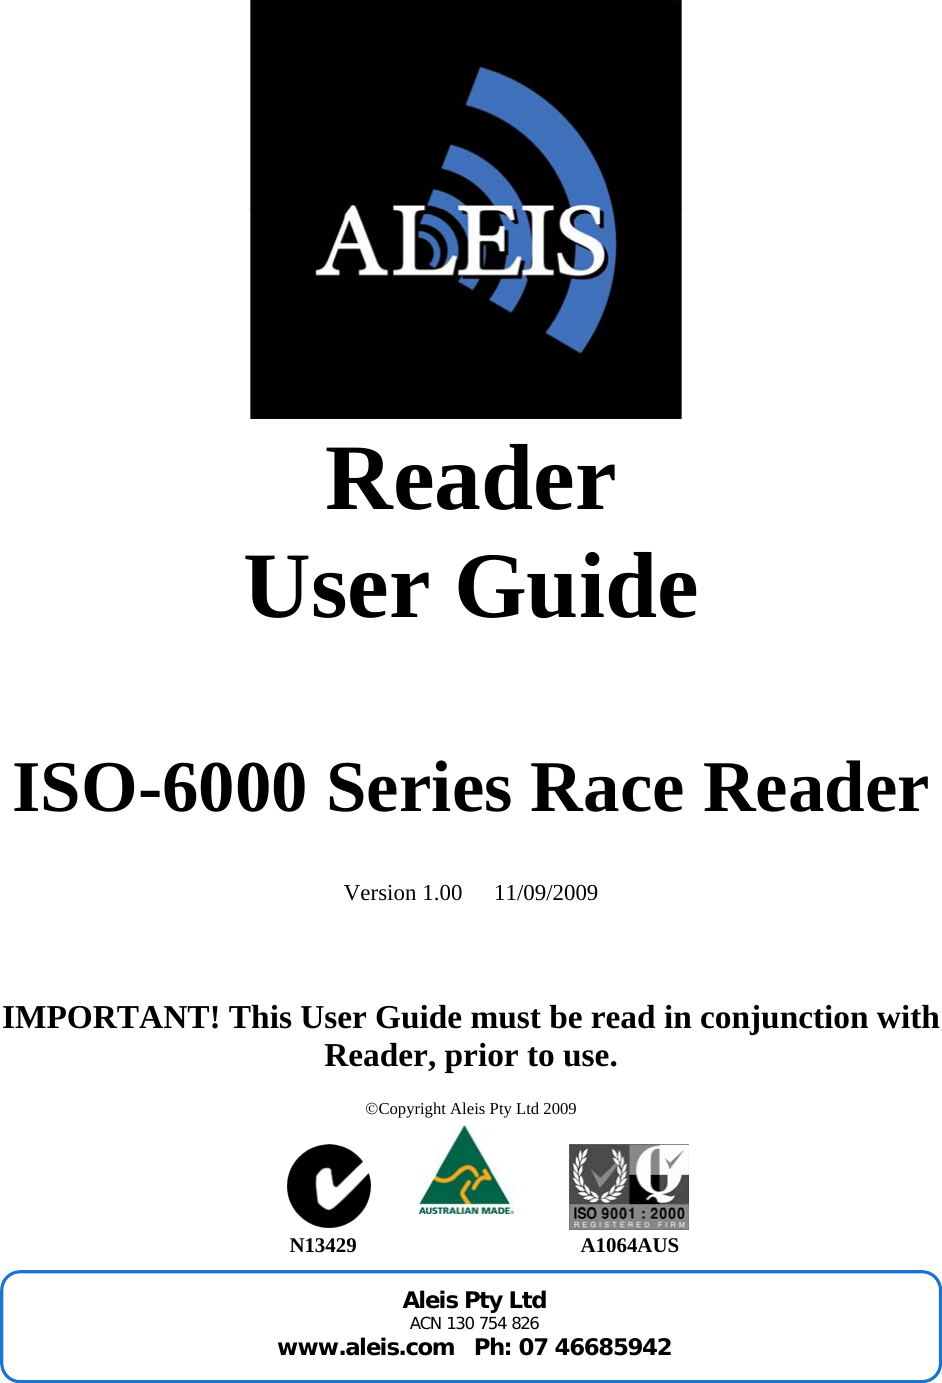 Aleis Pty Ltd ACN 130 754 826  www.aleis.com   Ph: 07 46685942         Reader  User Guide     ISO-6000 Series Race Reader   Version 1.00  11/09/2009    IMPORTANT! This User Guide must be read in conjunction with Reader, prior to use.  ©Copyright Aleis Pty Ltd 2009            N13429                                           A1064AUS